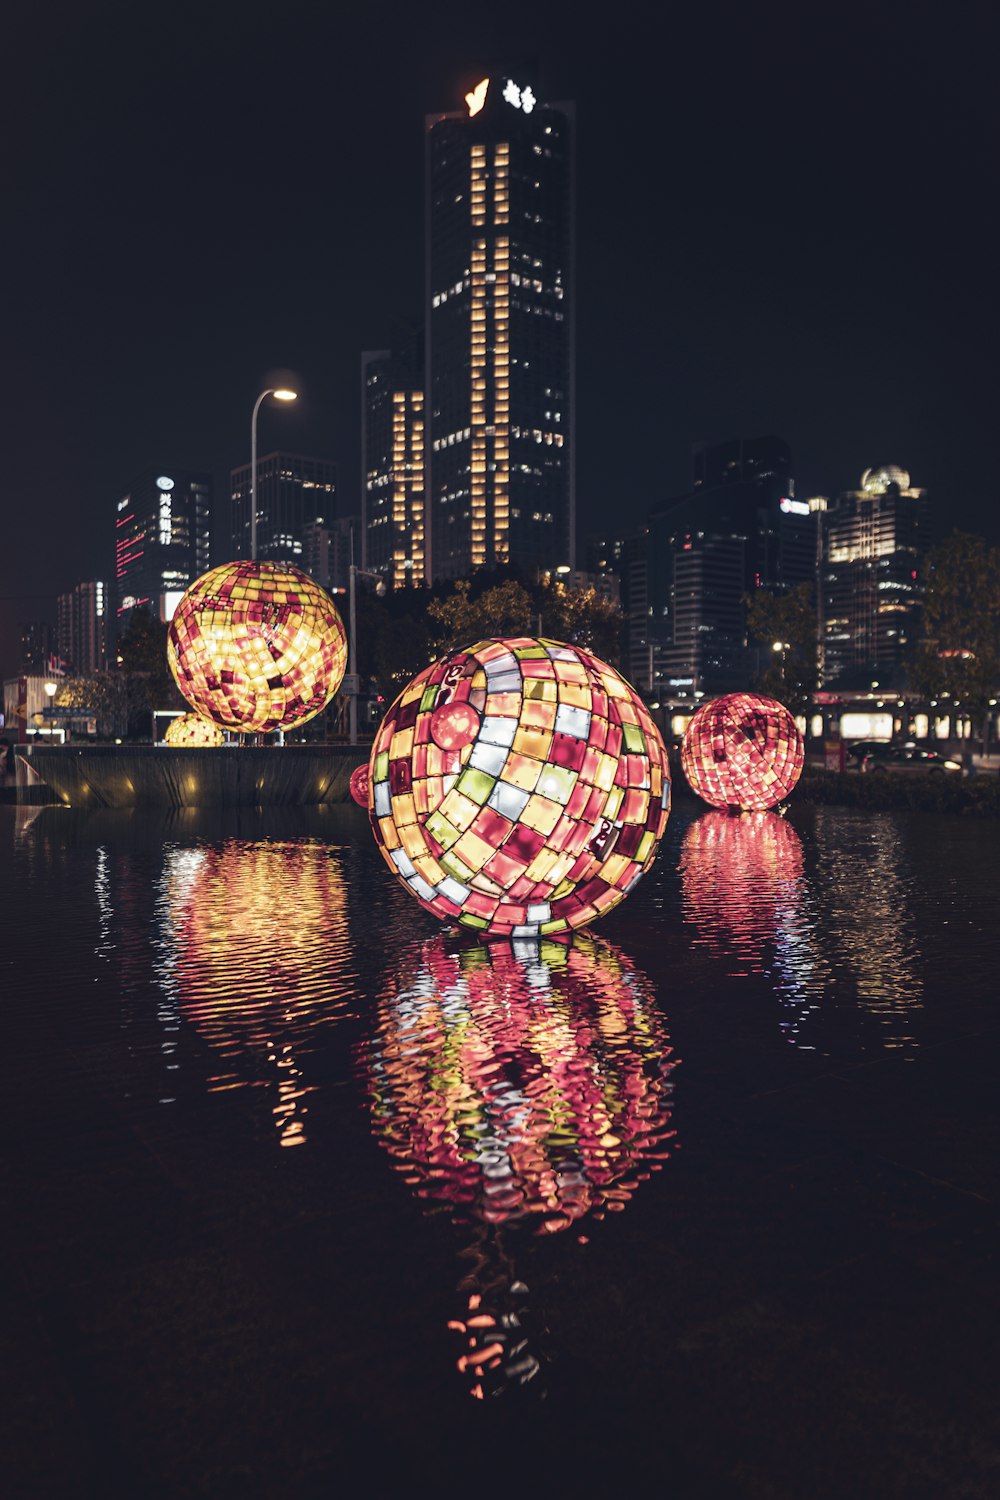 decorative balls with lights floating on body of water at the city during nighttime